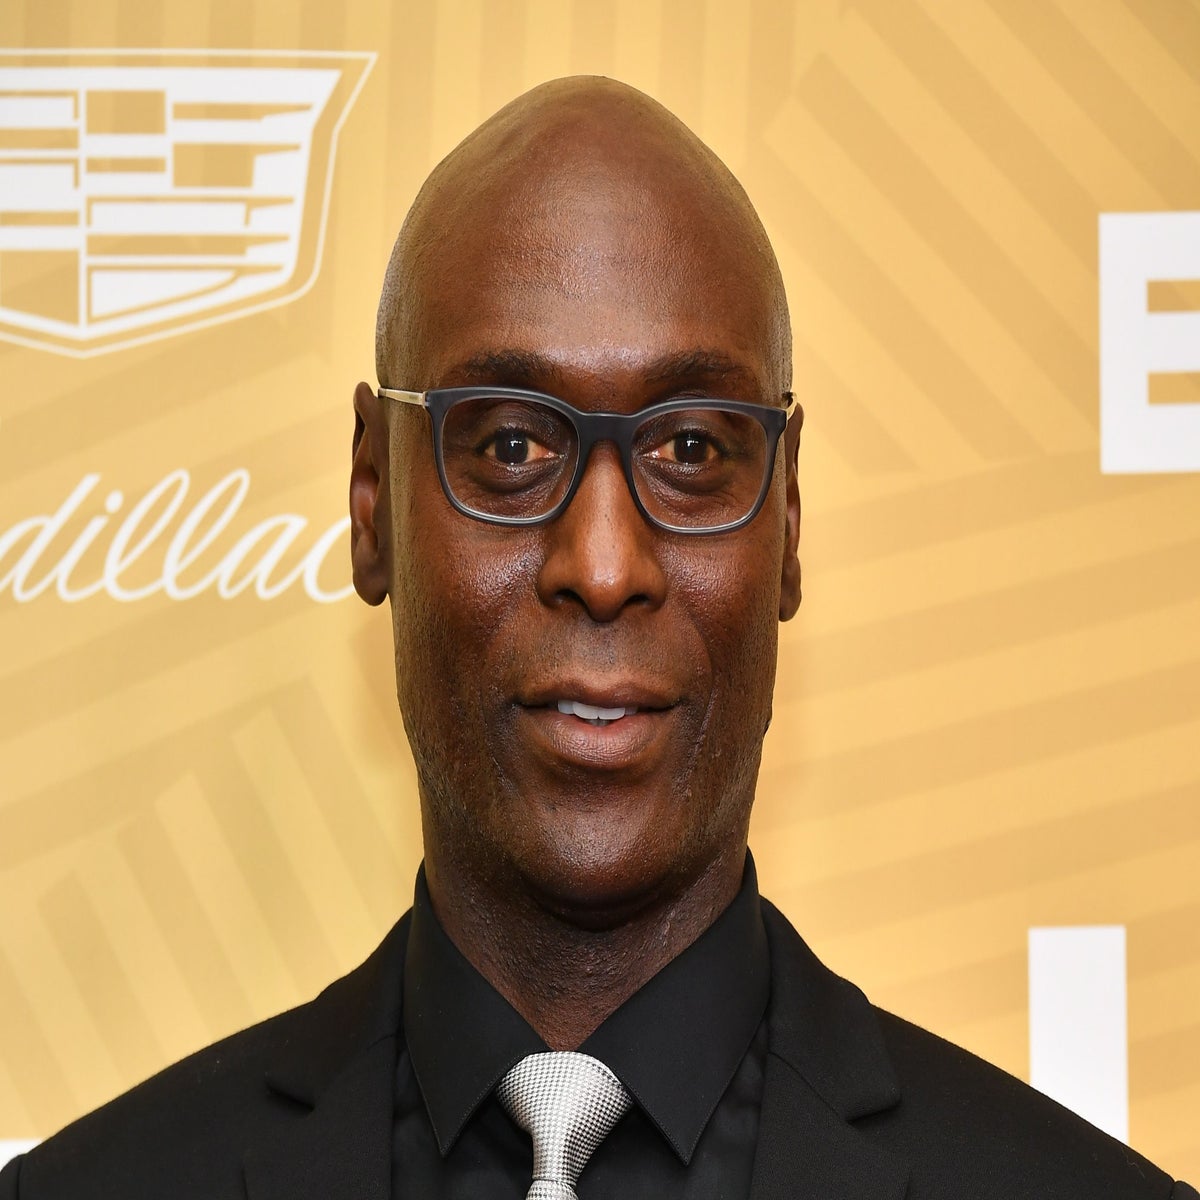 The Last TV Show Lance Reddick Was In Before He Died